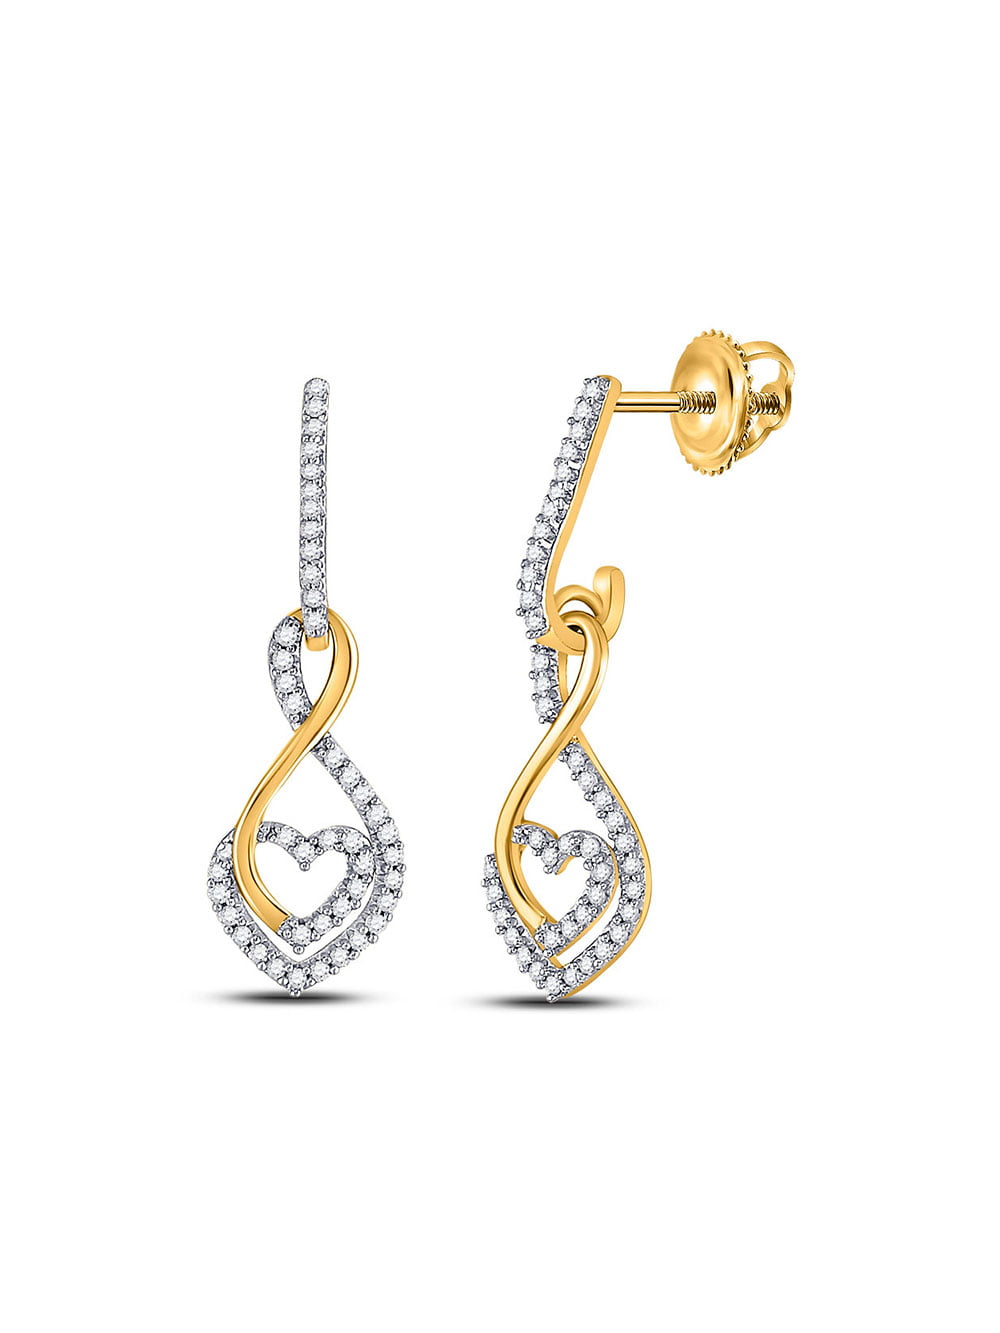 7 Gold Earrings For Women To Own Or Gift